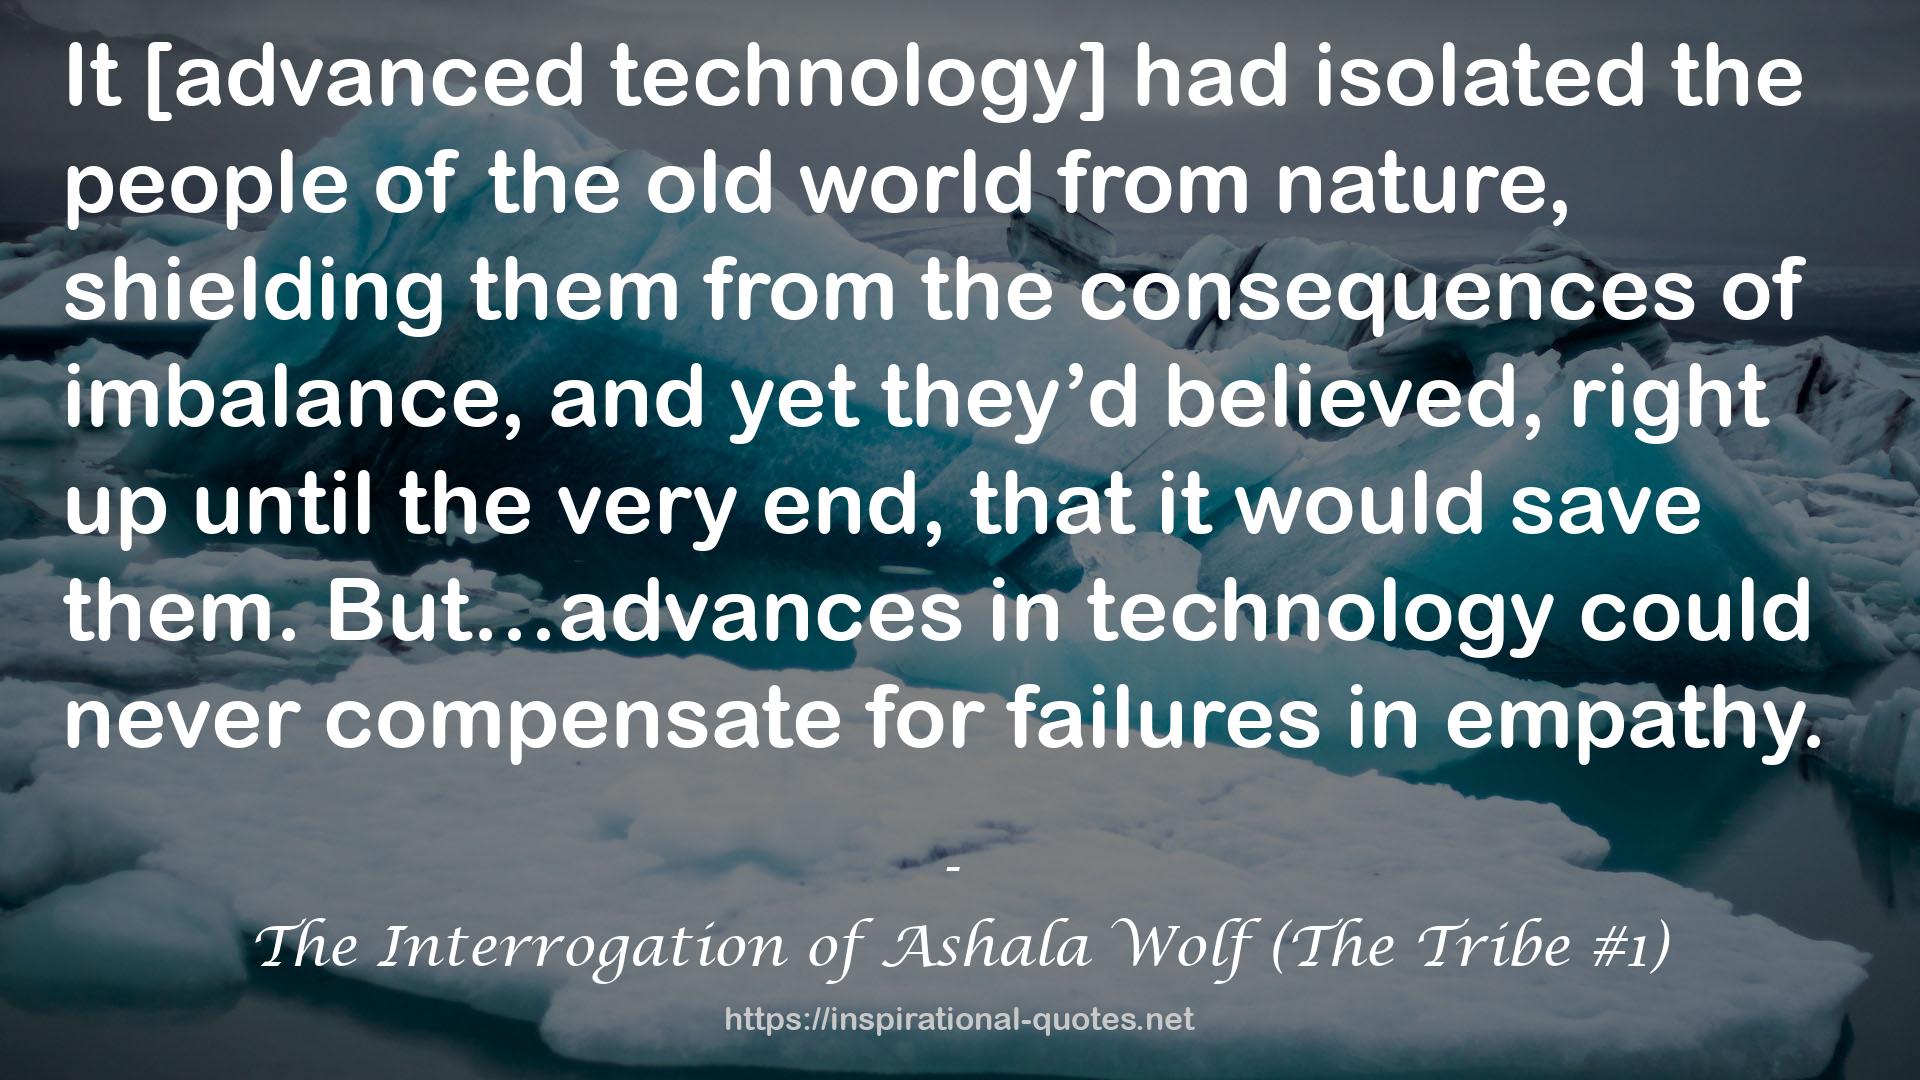 The Interrogation of Ashala Wolf (The Tribe #1) QUOTES